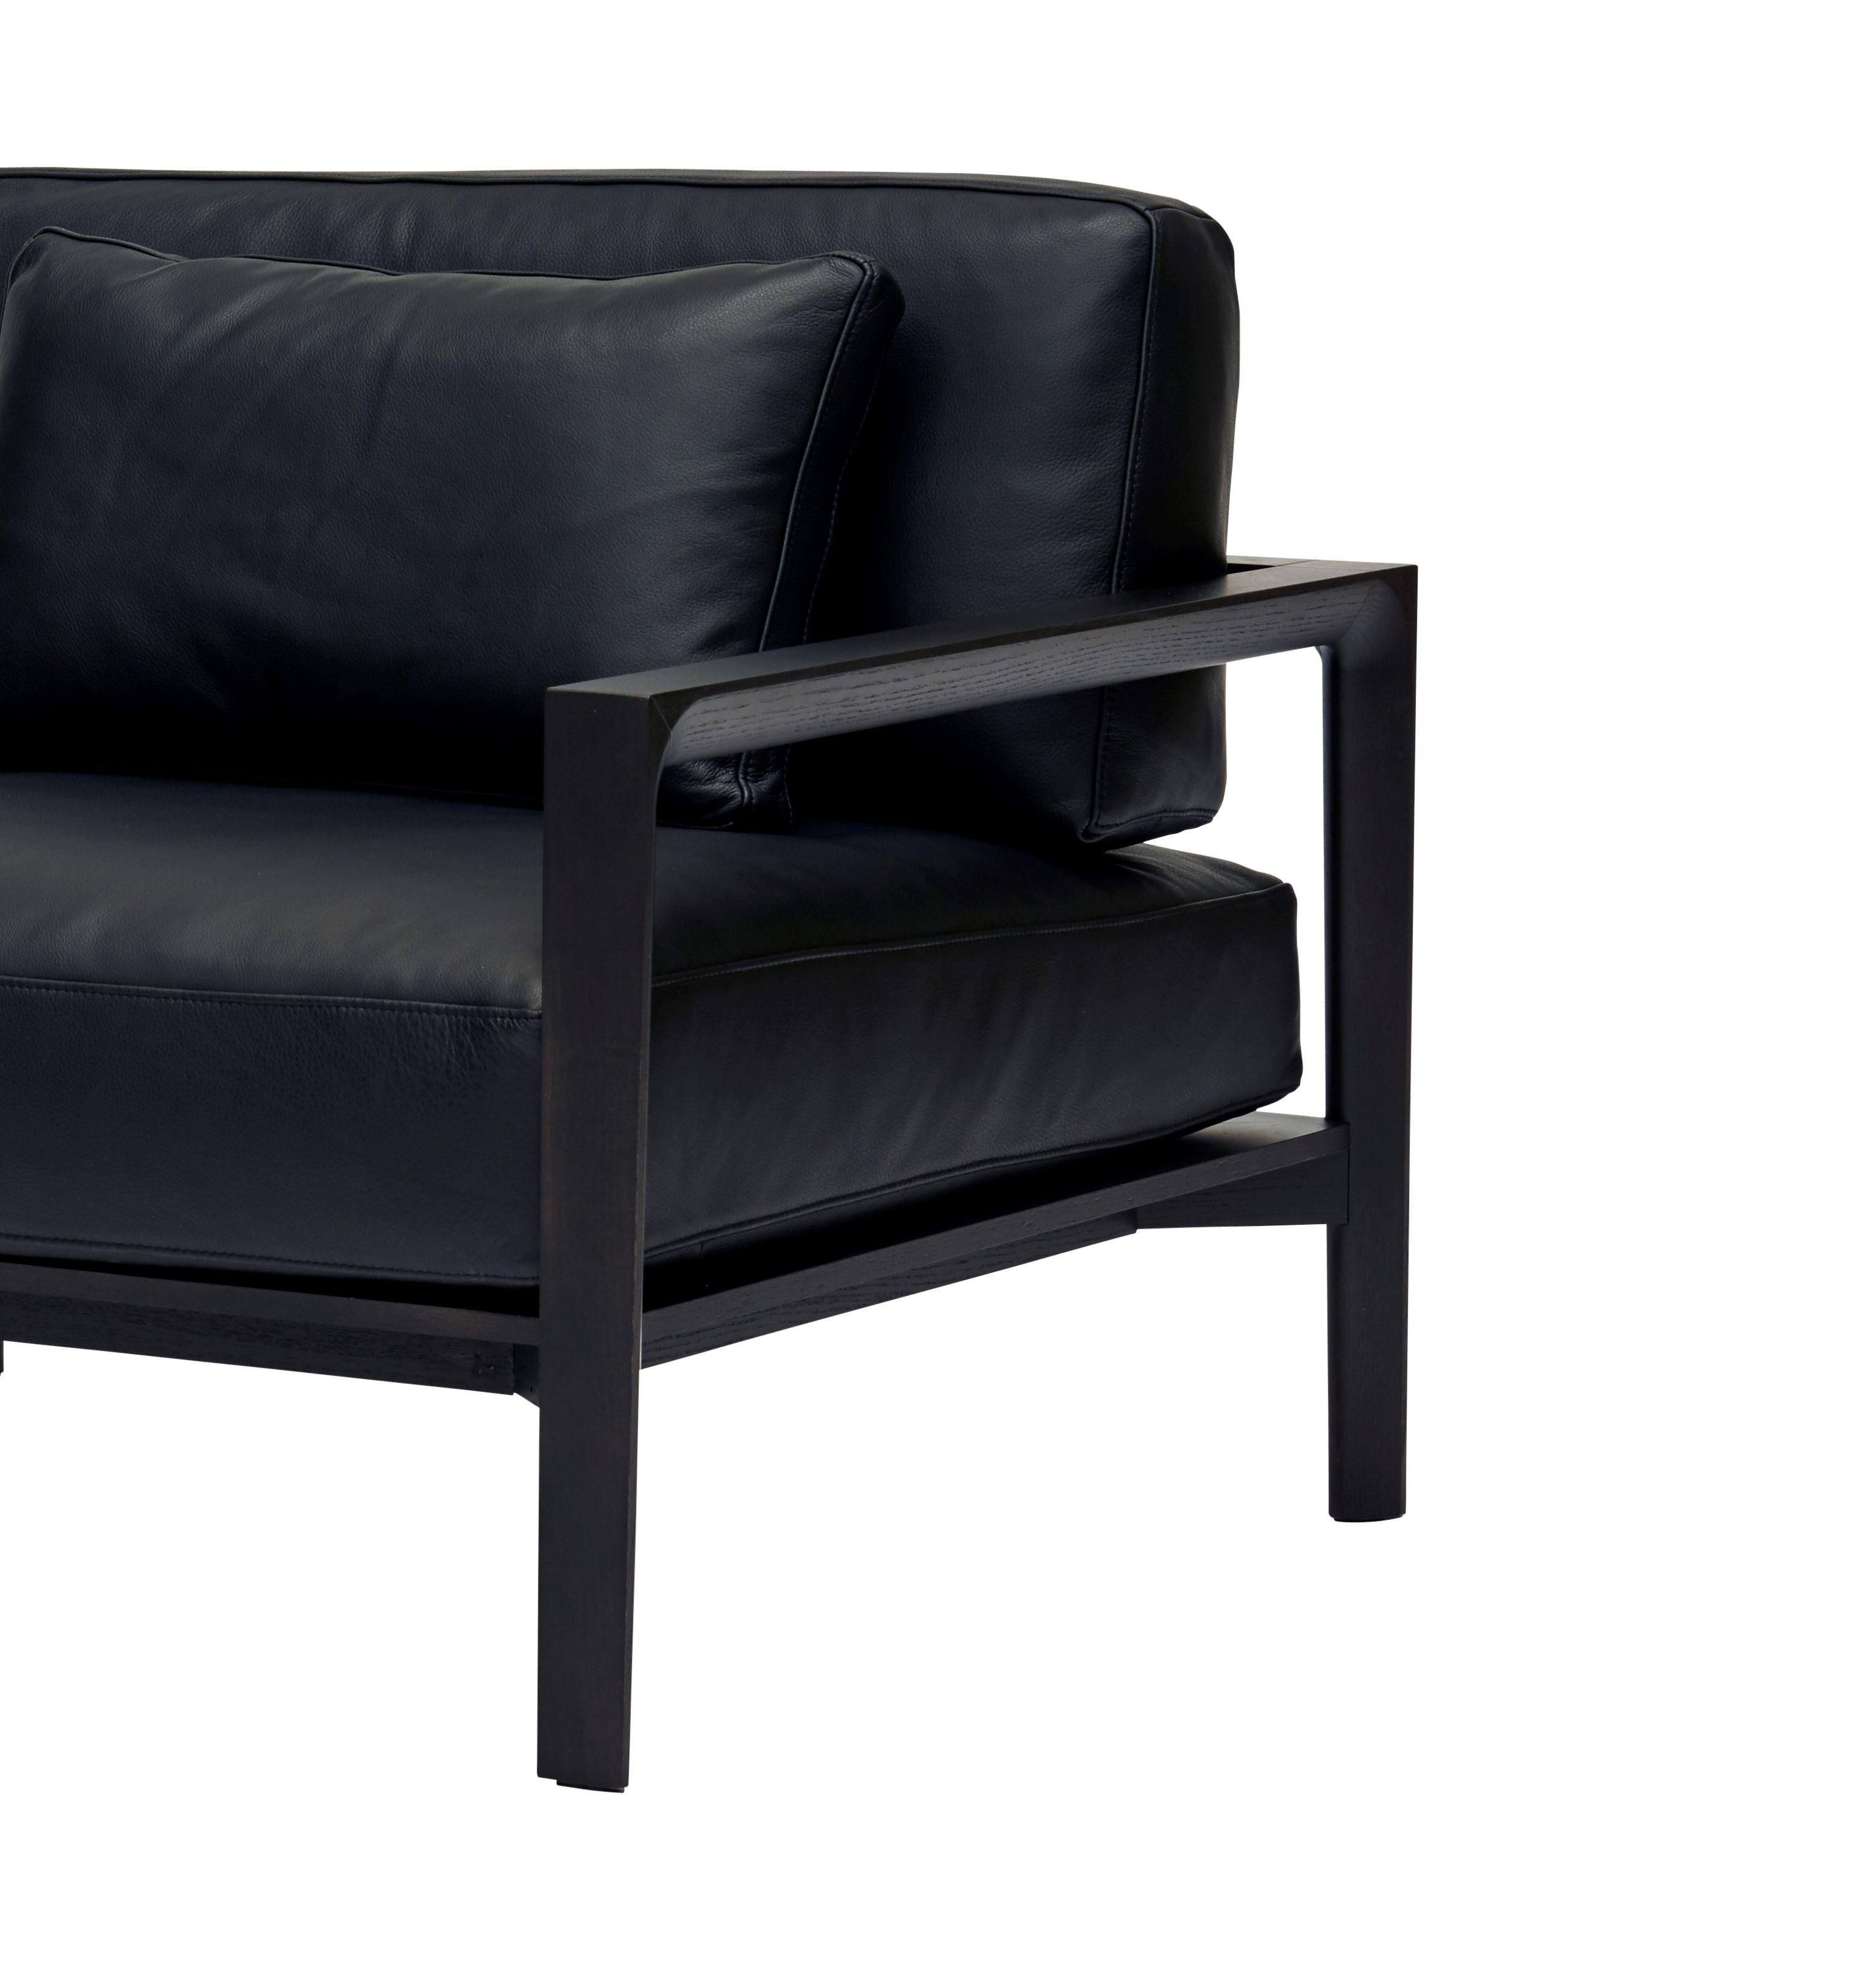 Modern SP01 Ling Sofa -Timber Frame, Upholstered Black Lisbon Leather, Made in Italy For Sale